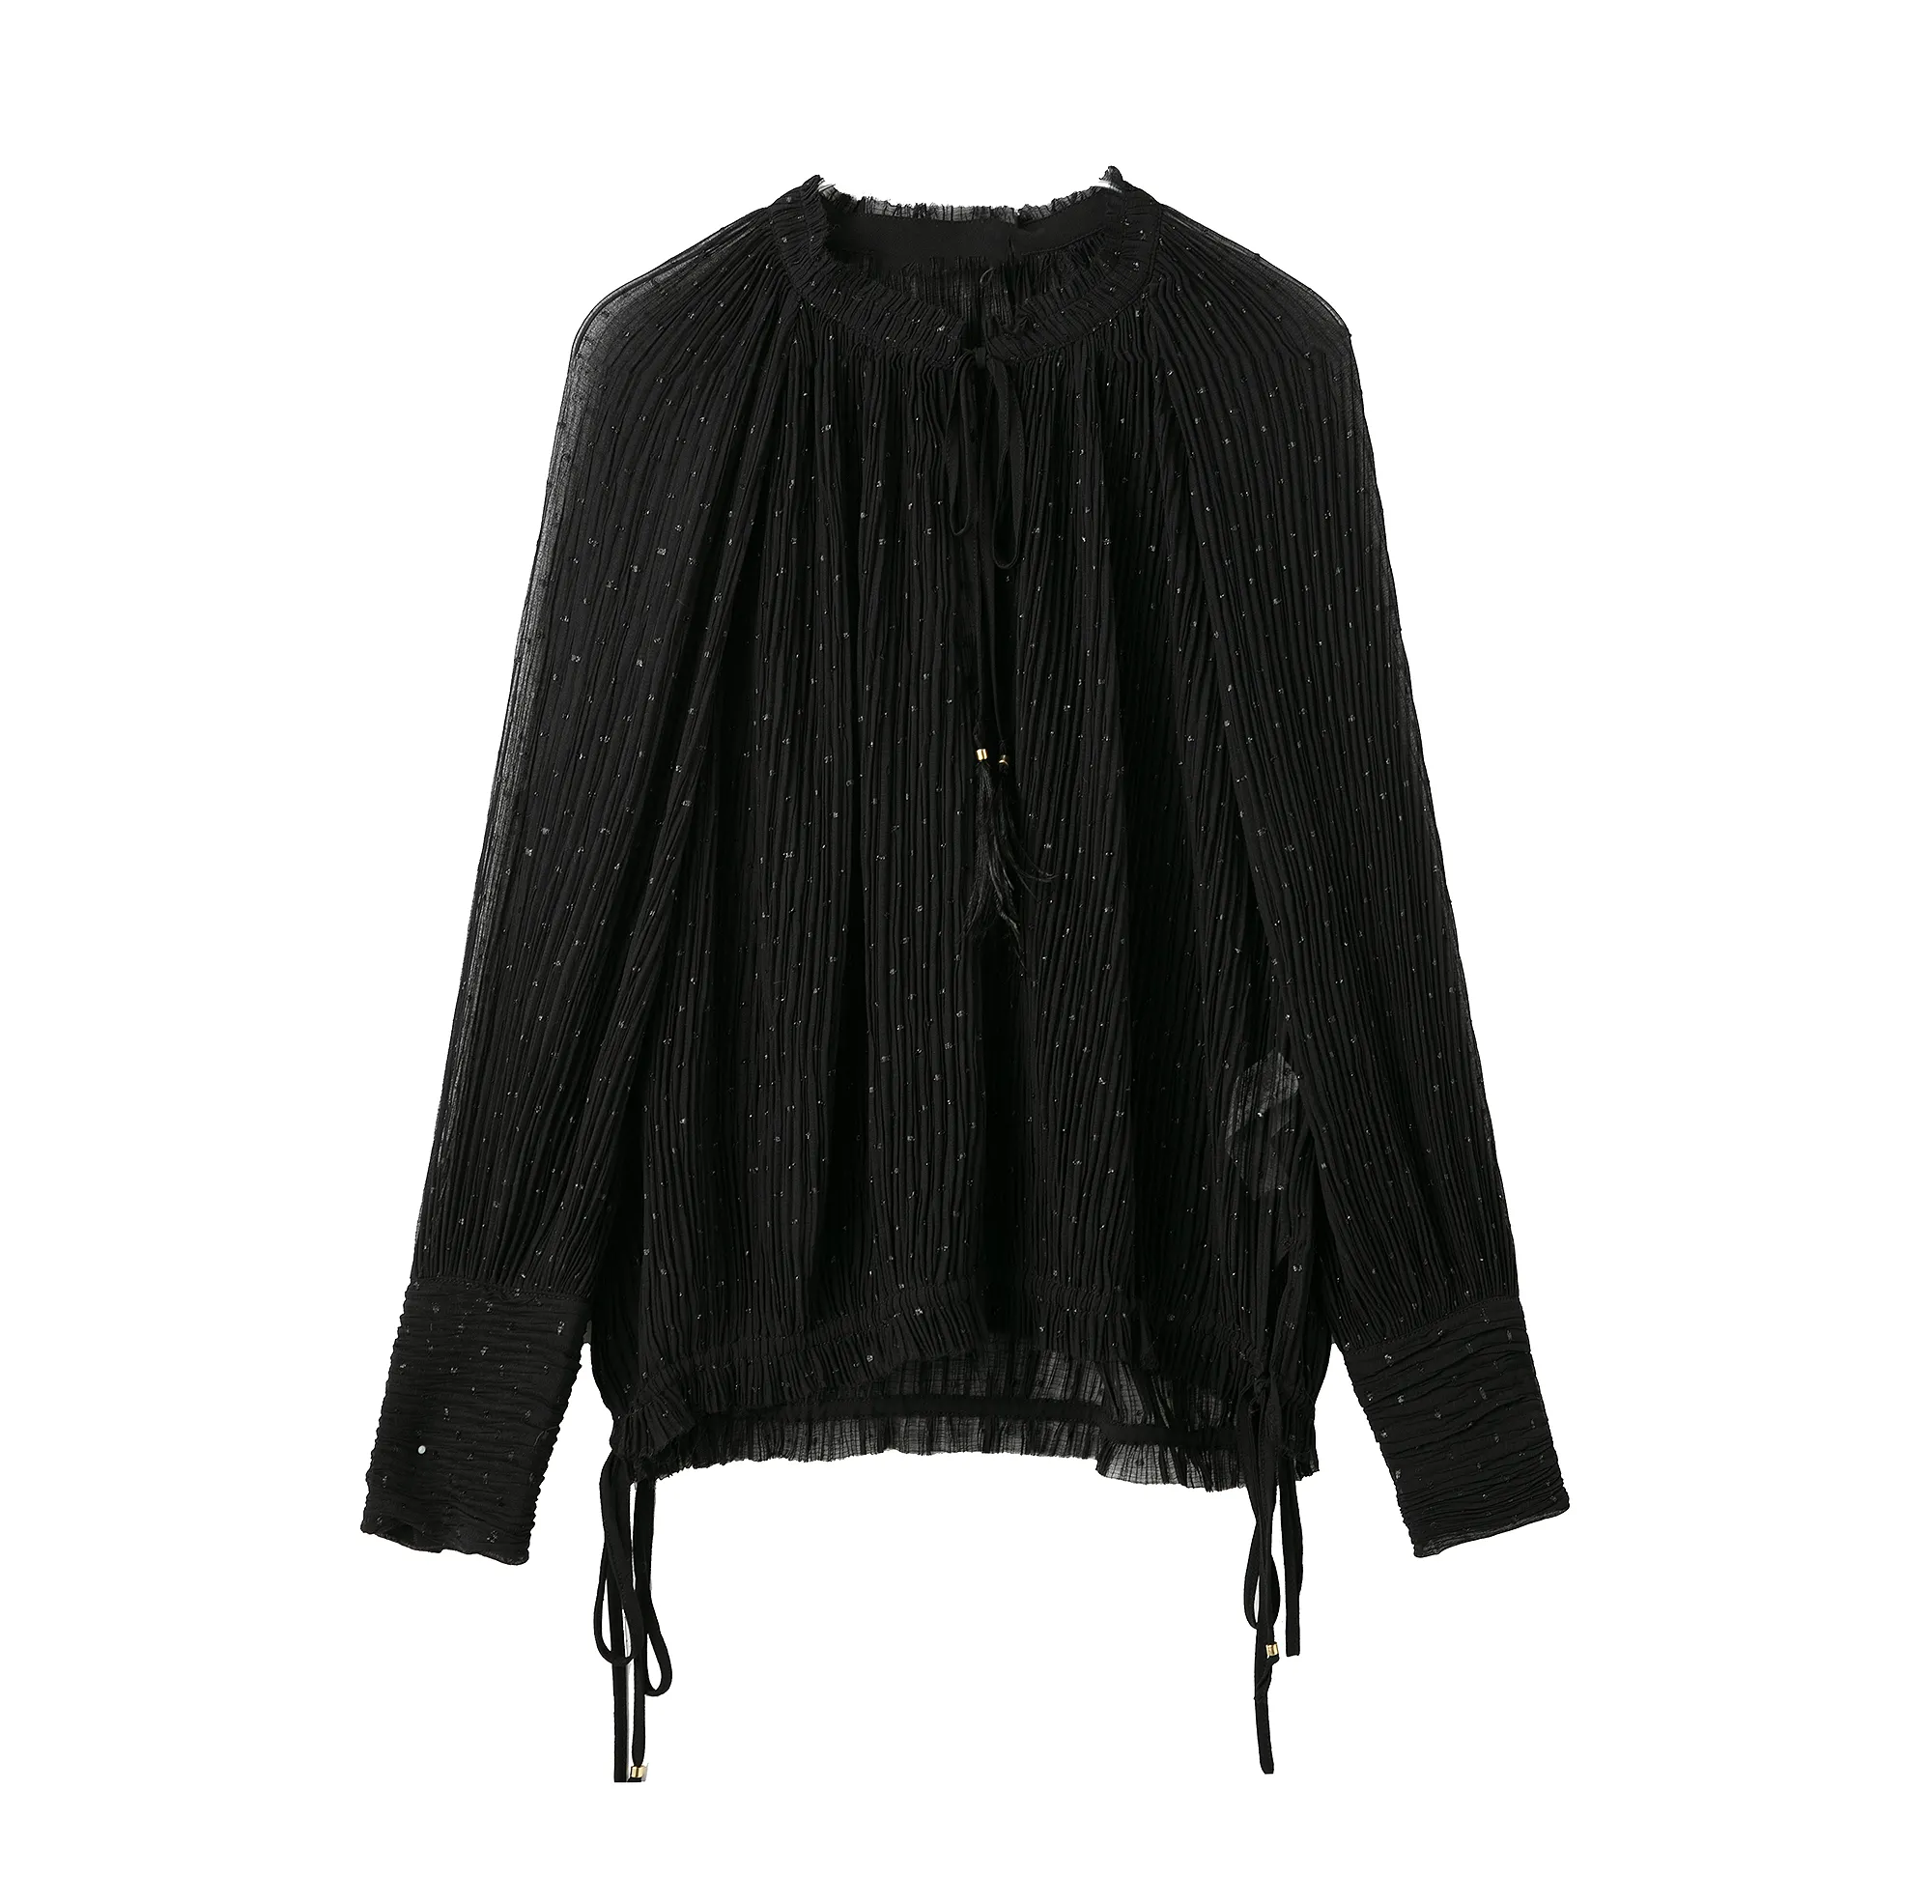 Black color crew neck long sleeve bottom lace up casual fashion blouse tops for women